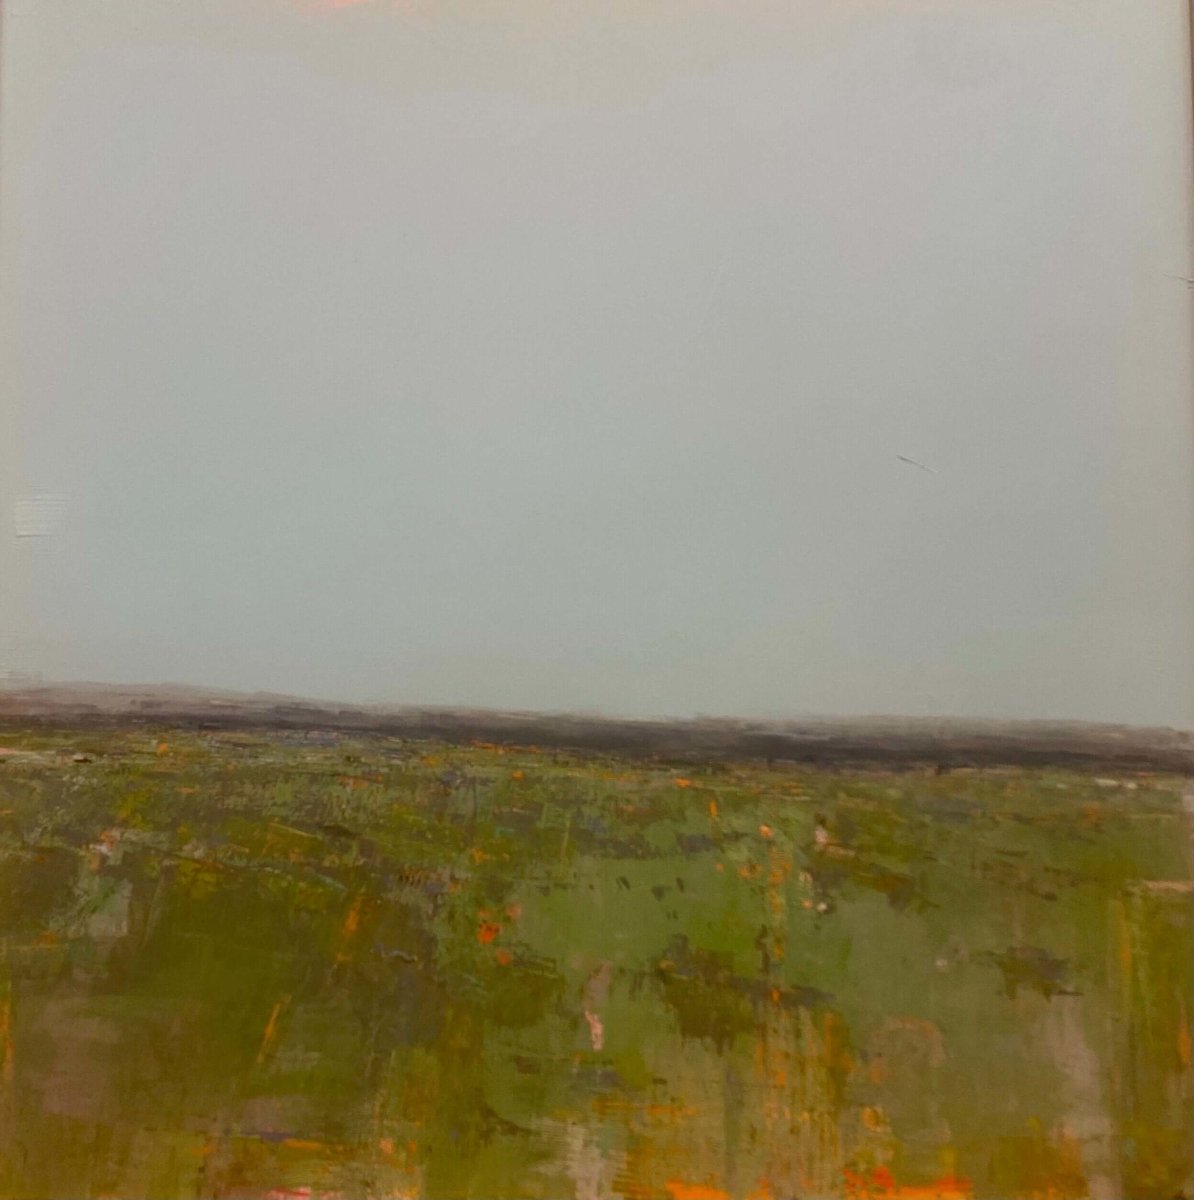 Field and Farm Series #2 by Deborah Hill at LePrince Galleries